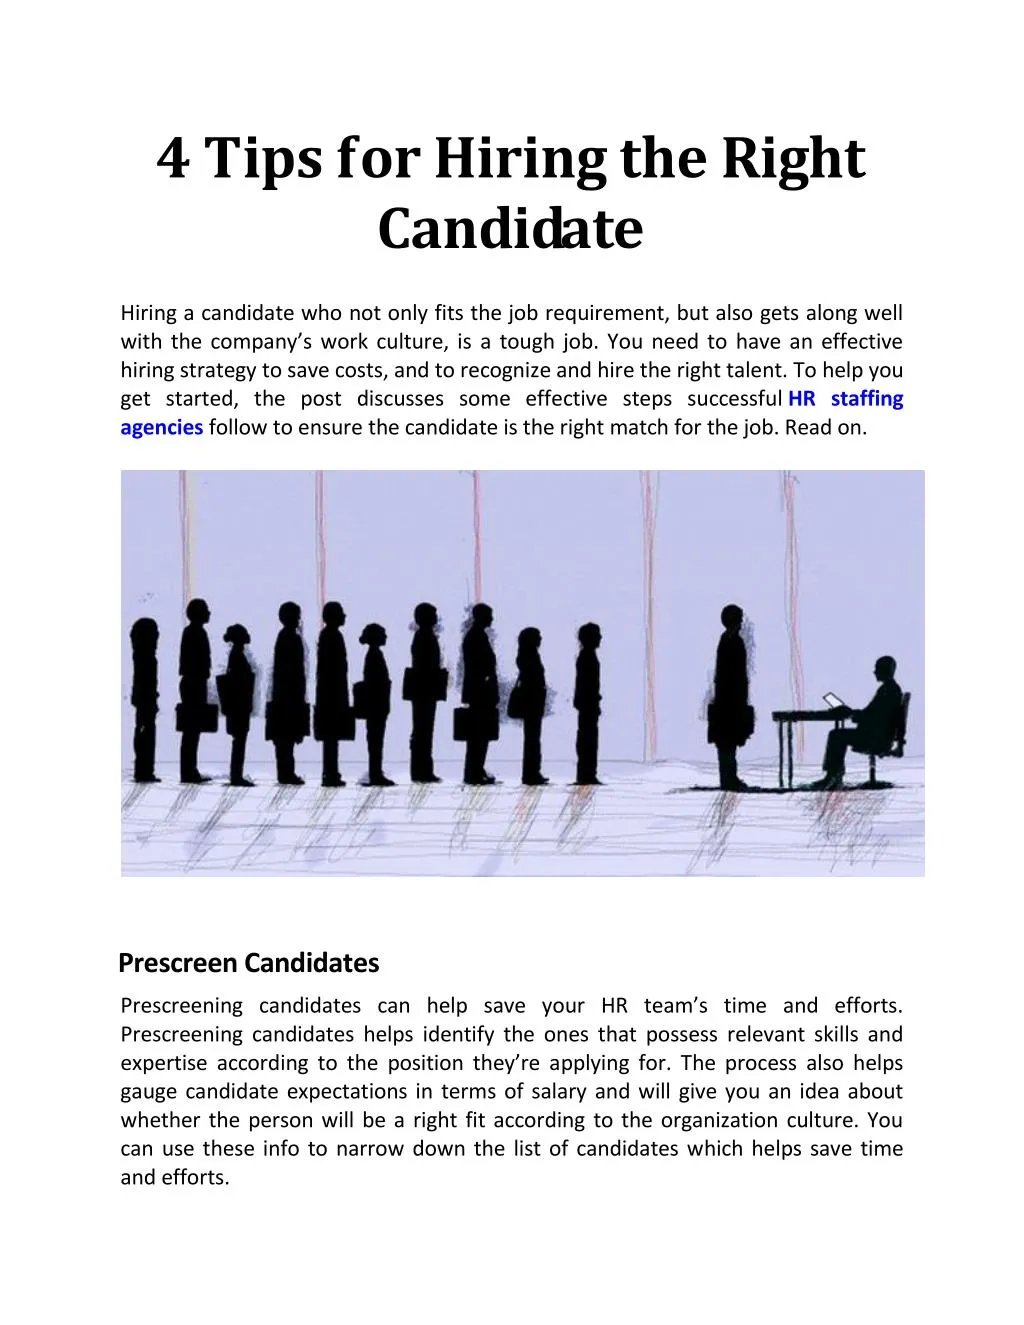 4 tips for hiring the right candidate